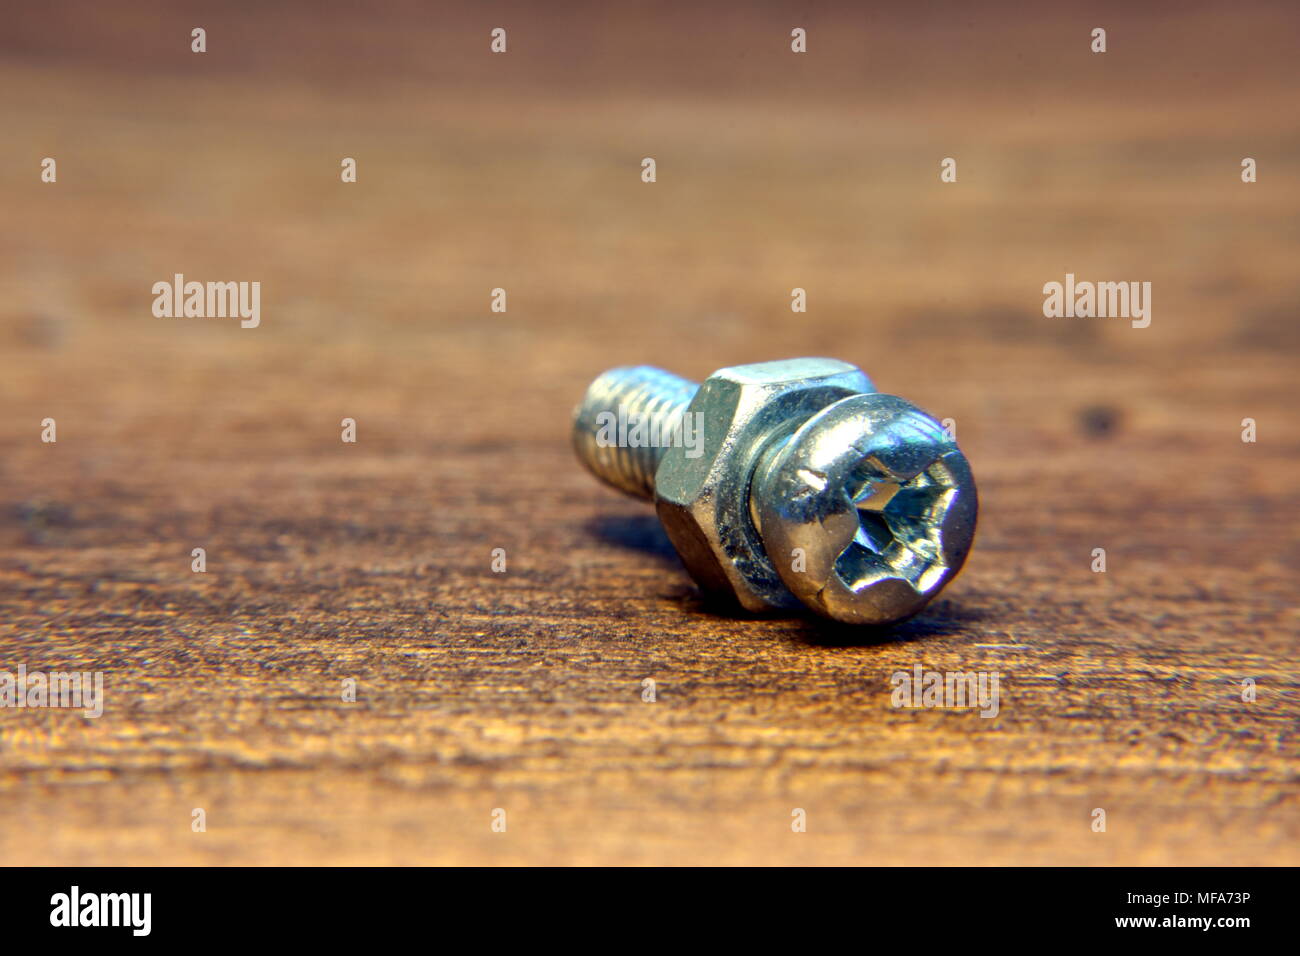 Nut and bolt Stock Photo